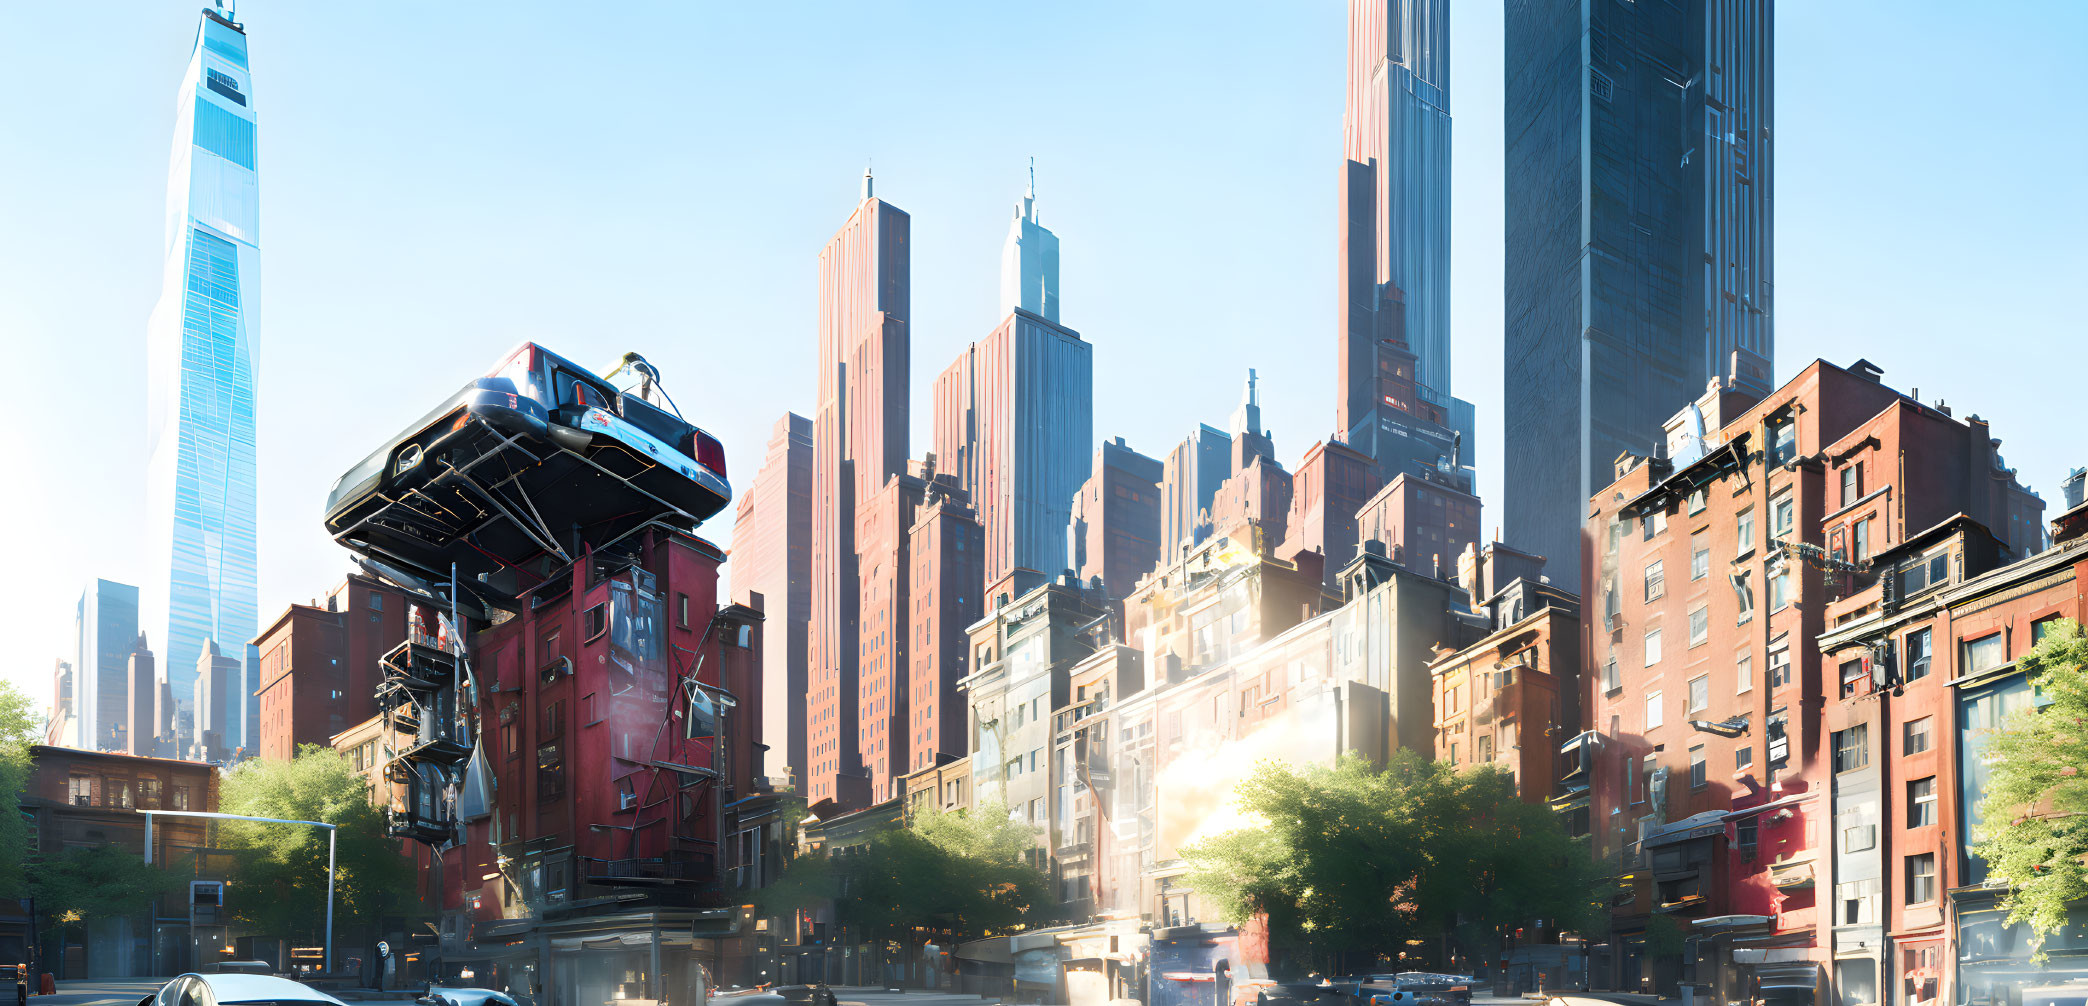 Stacked futuristic cityscape with tall skyscrapers and traditional architecture